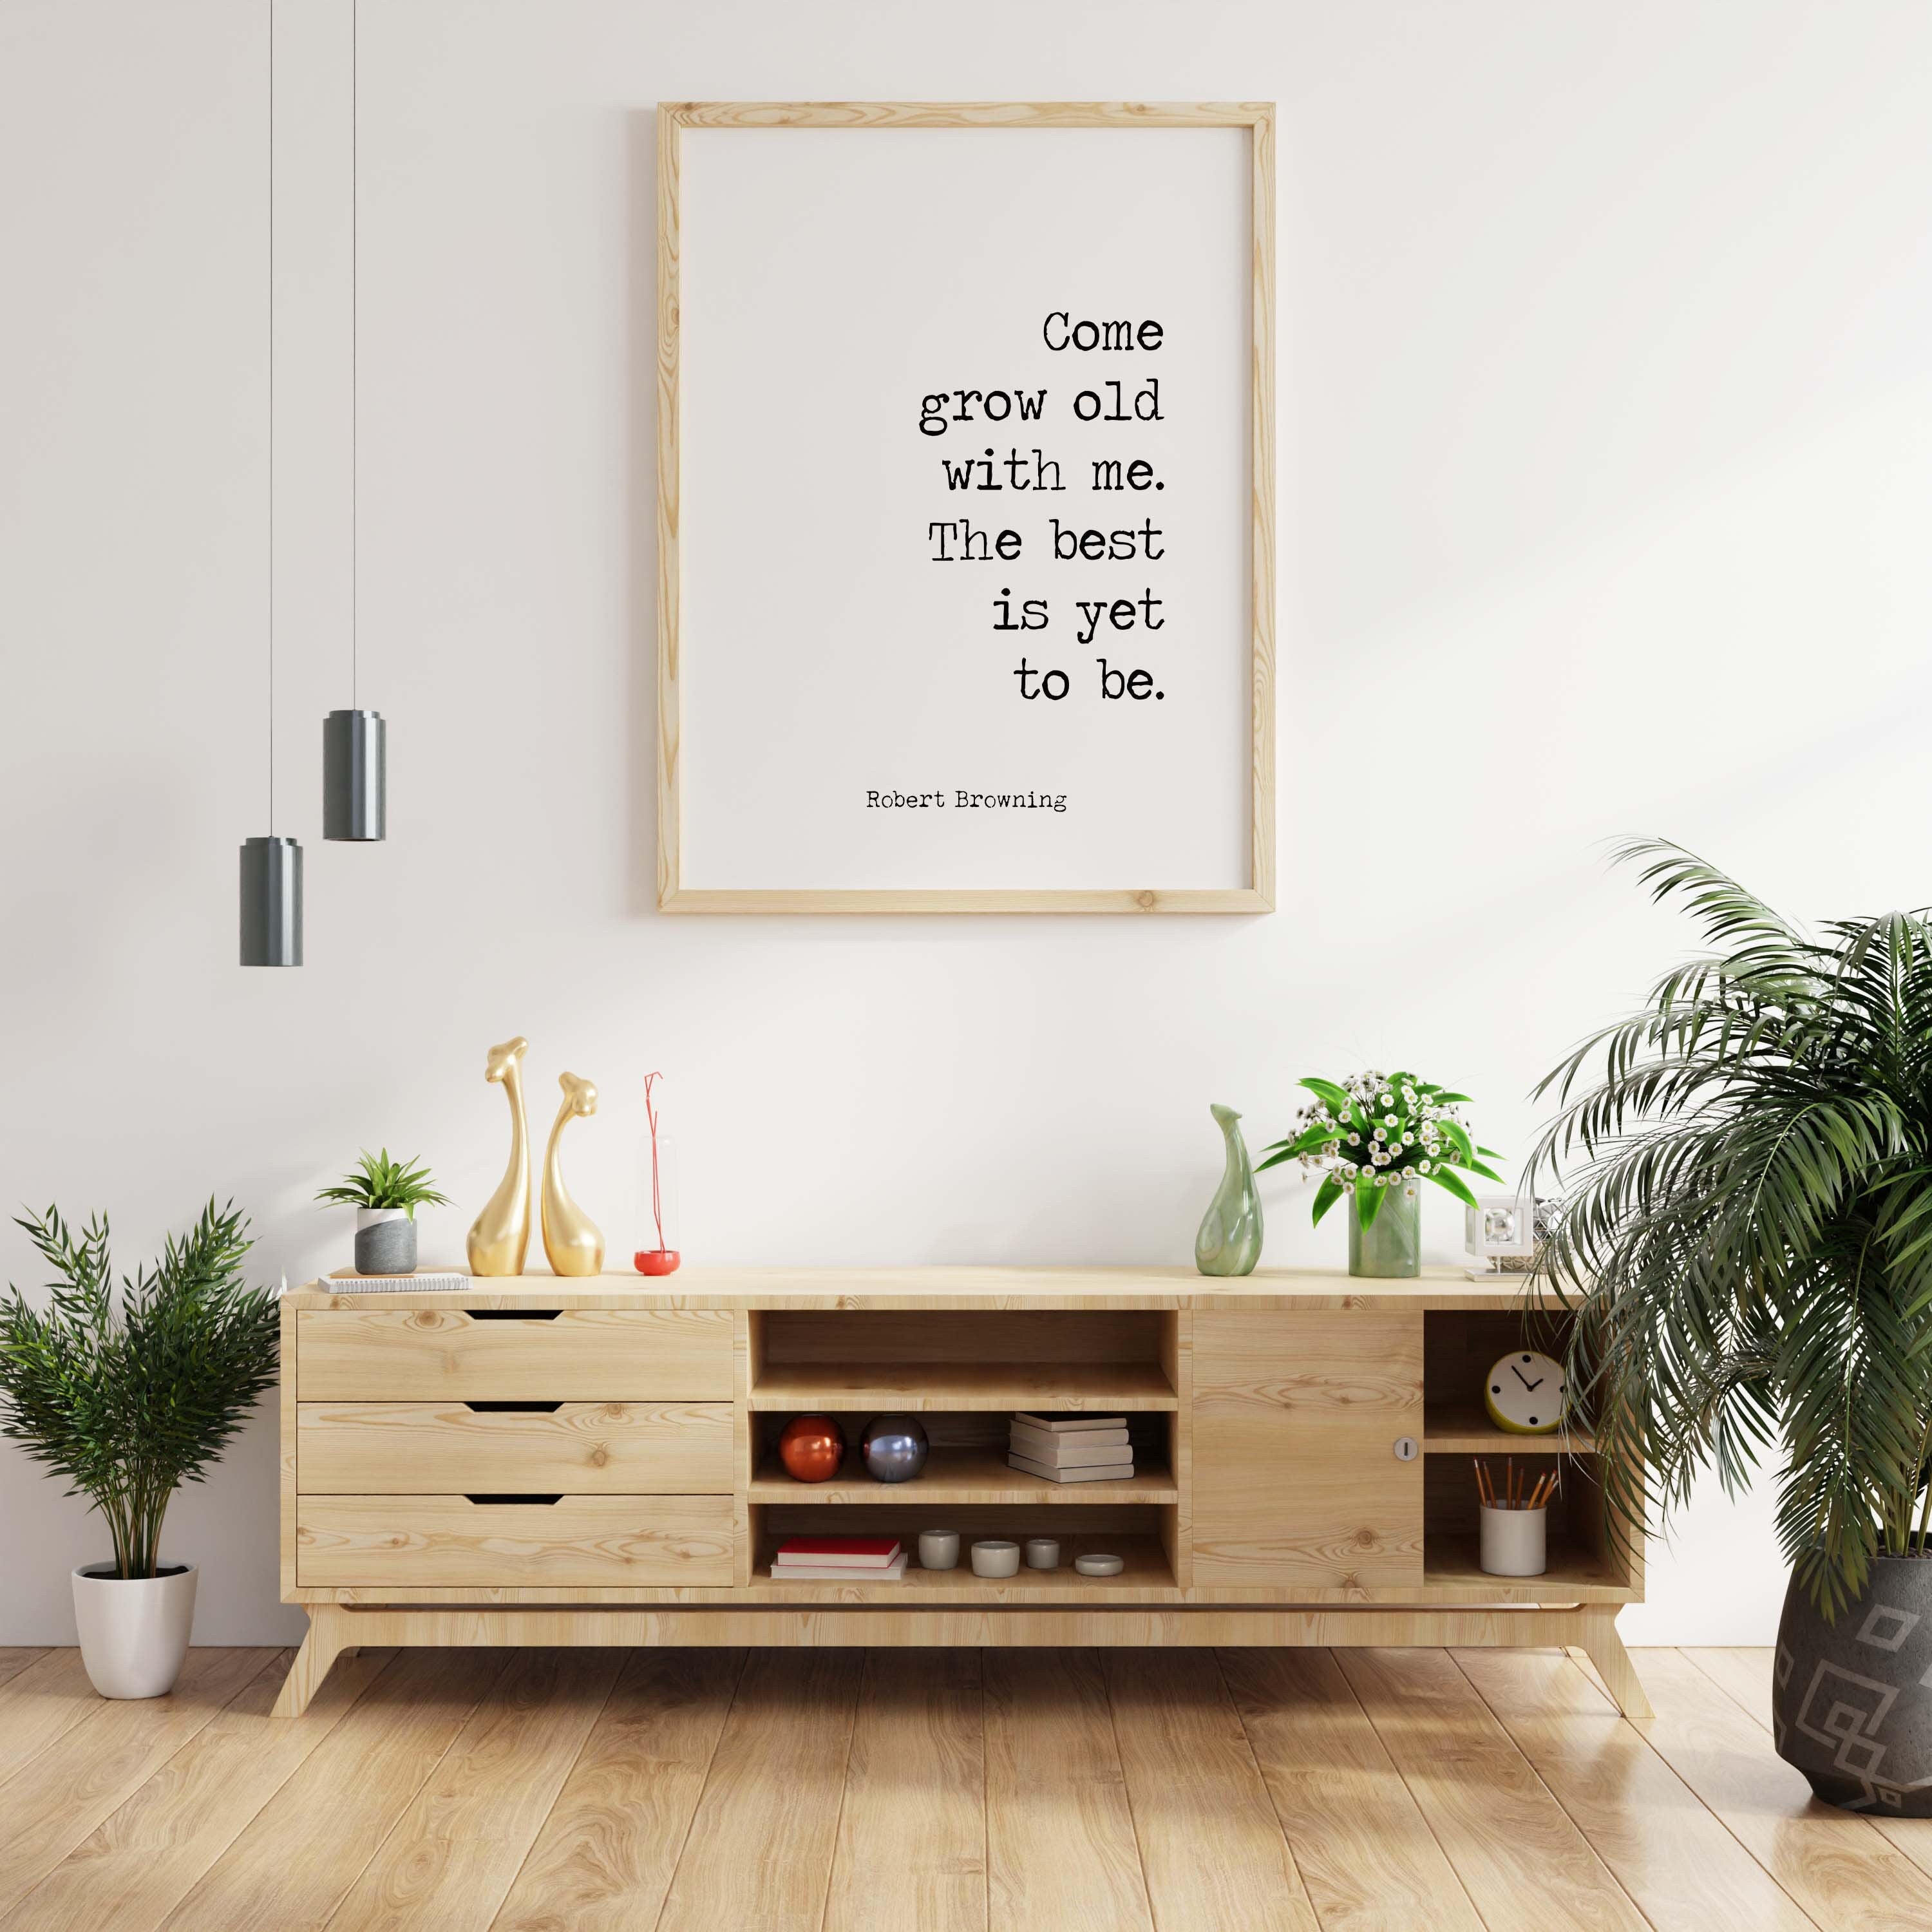 Grow Old With Me Art Print, Robert Browning Poetry in Black and White